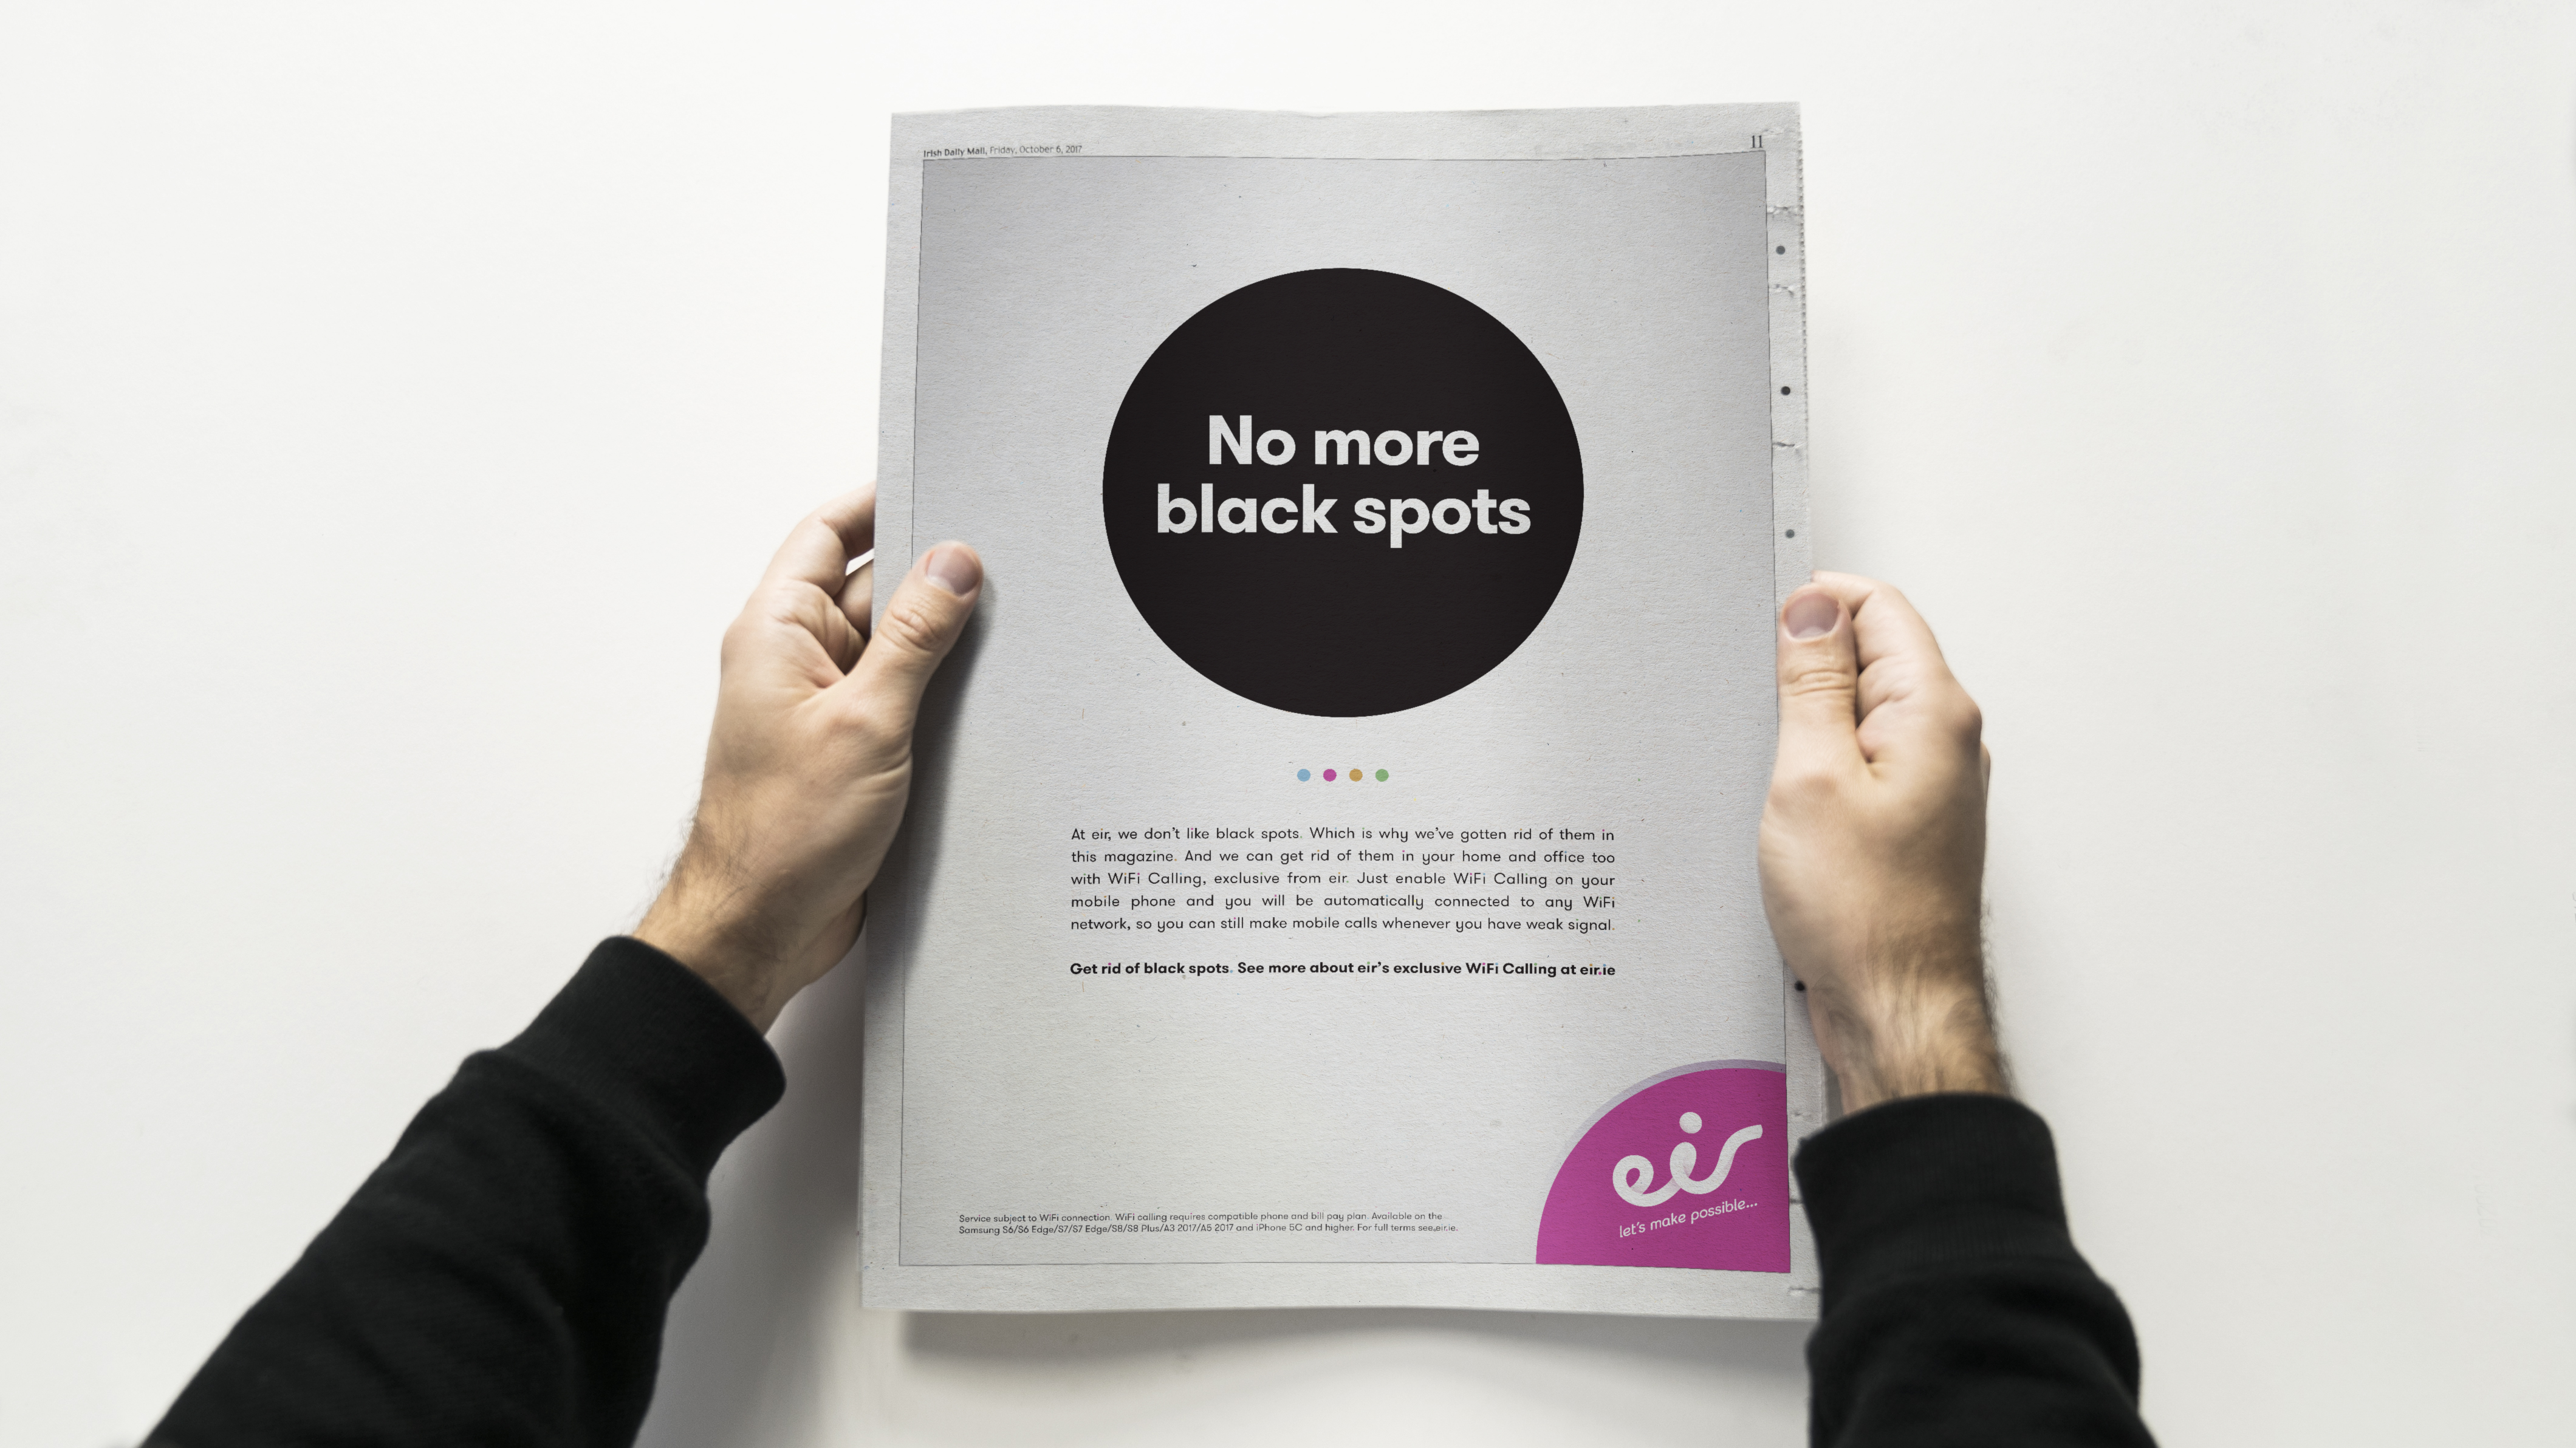 ROTHCO and eir Remove All Black Spots in National Magazine Takeover 